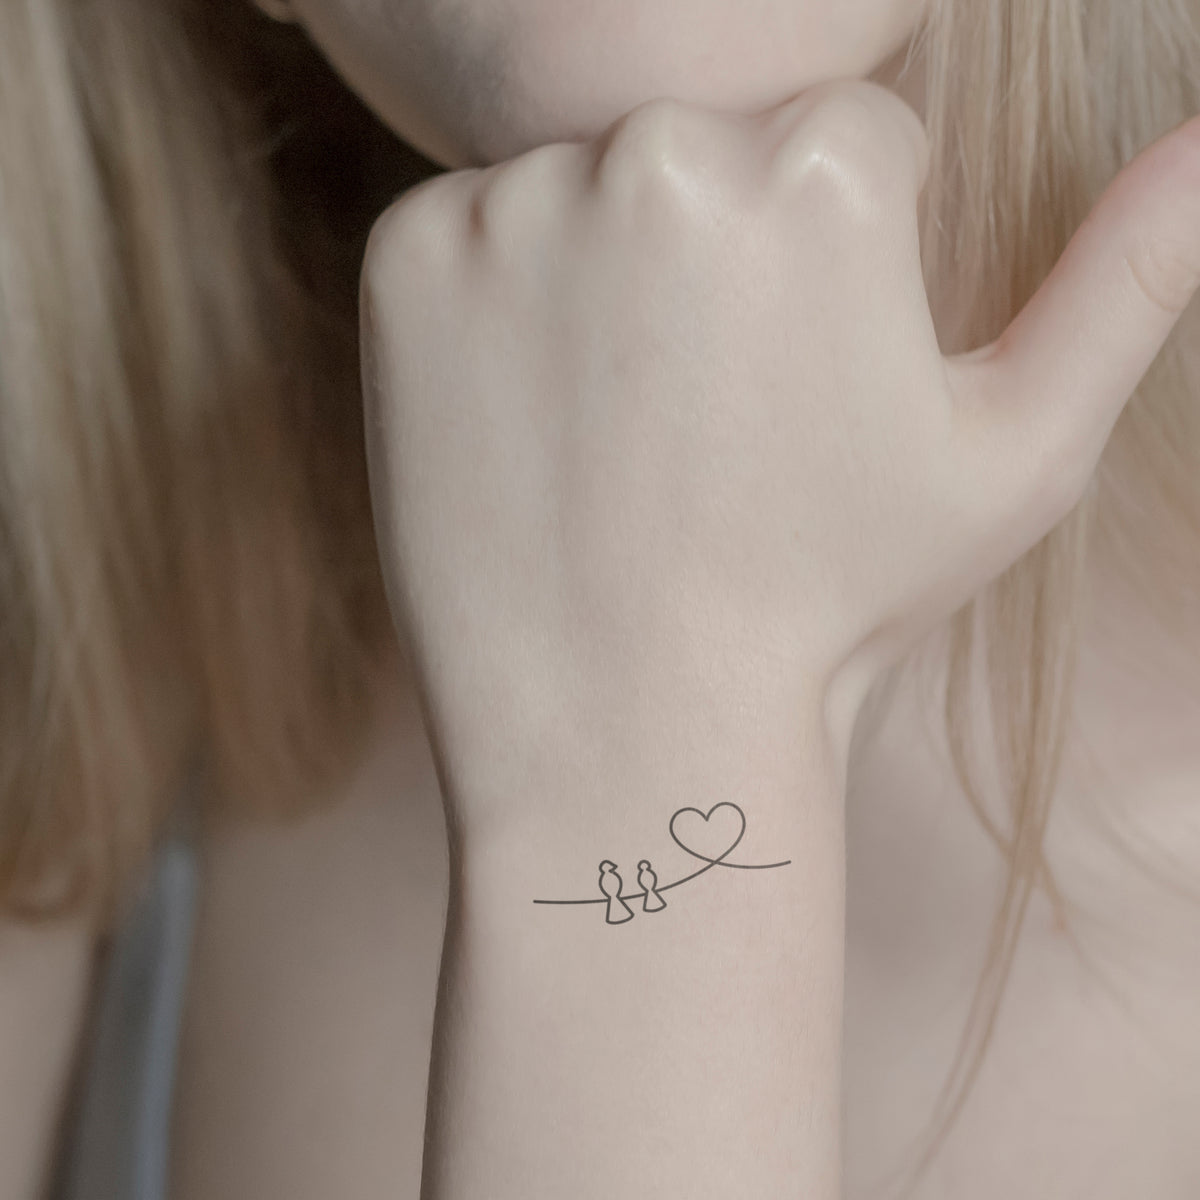 PRX » Piece » A New View of Loop Tattoo